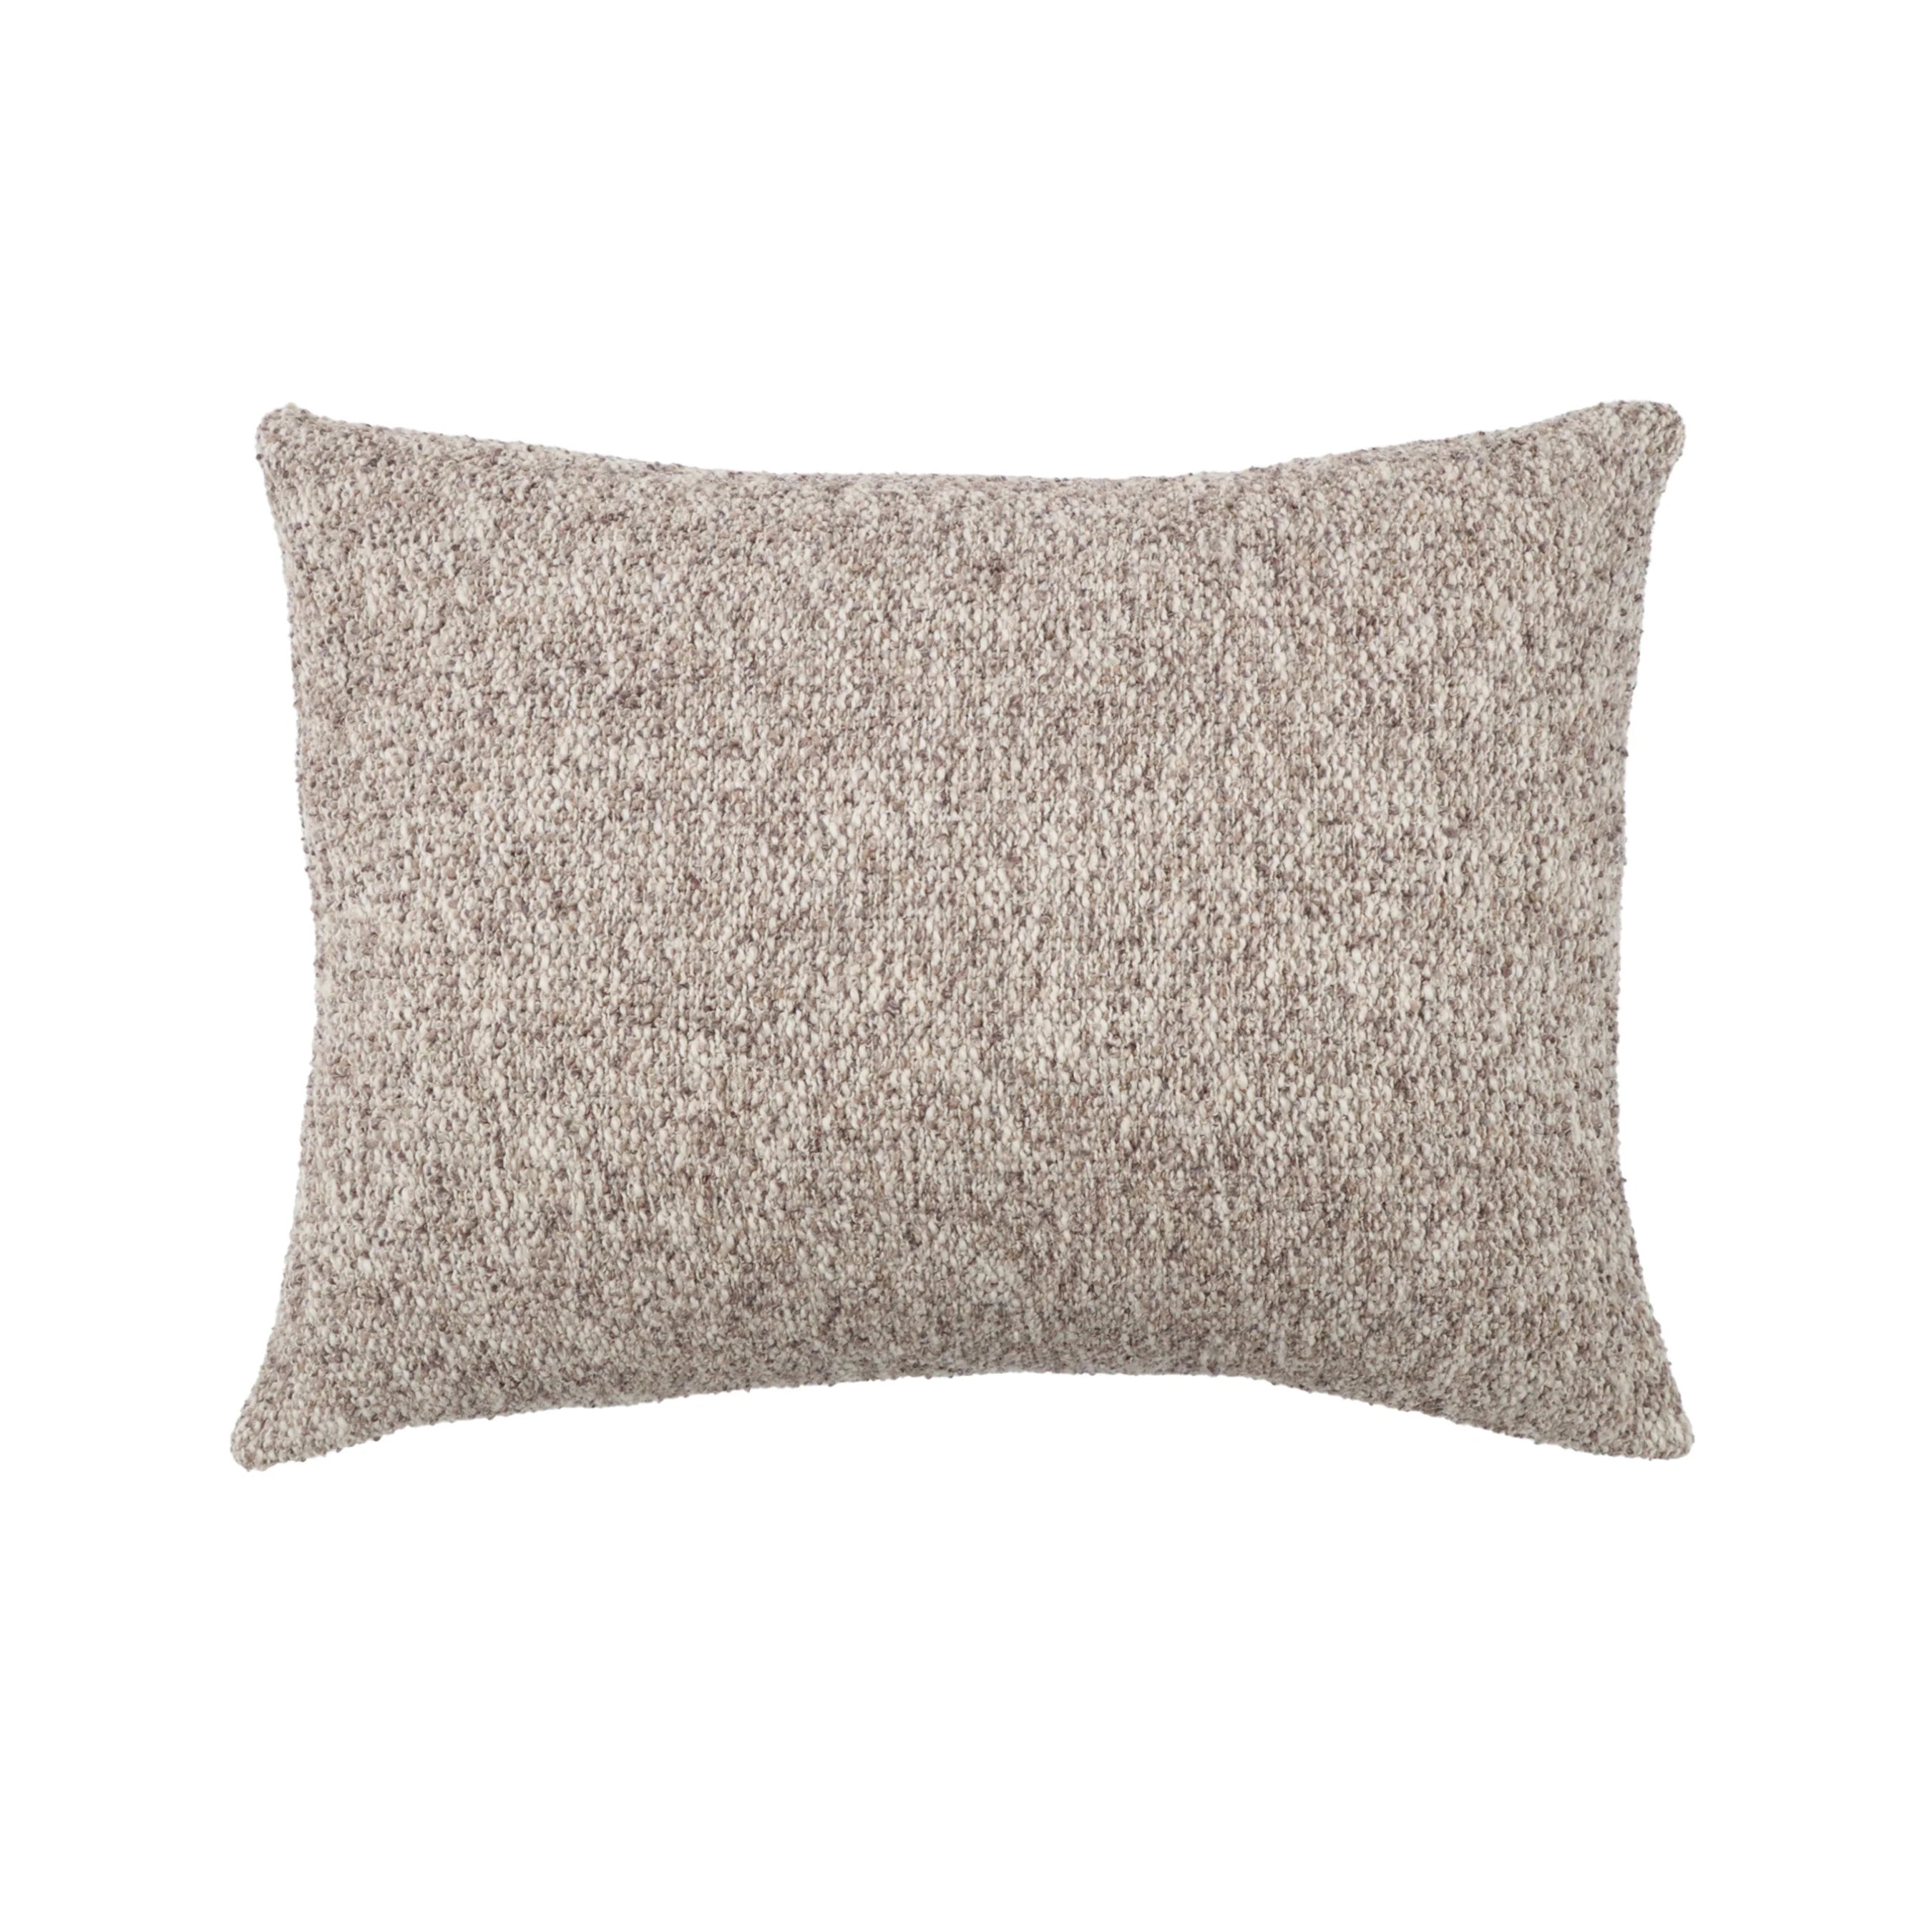 Brentwood Big Pillow With Insert